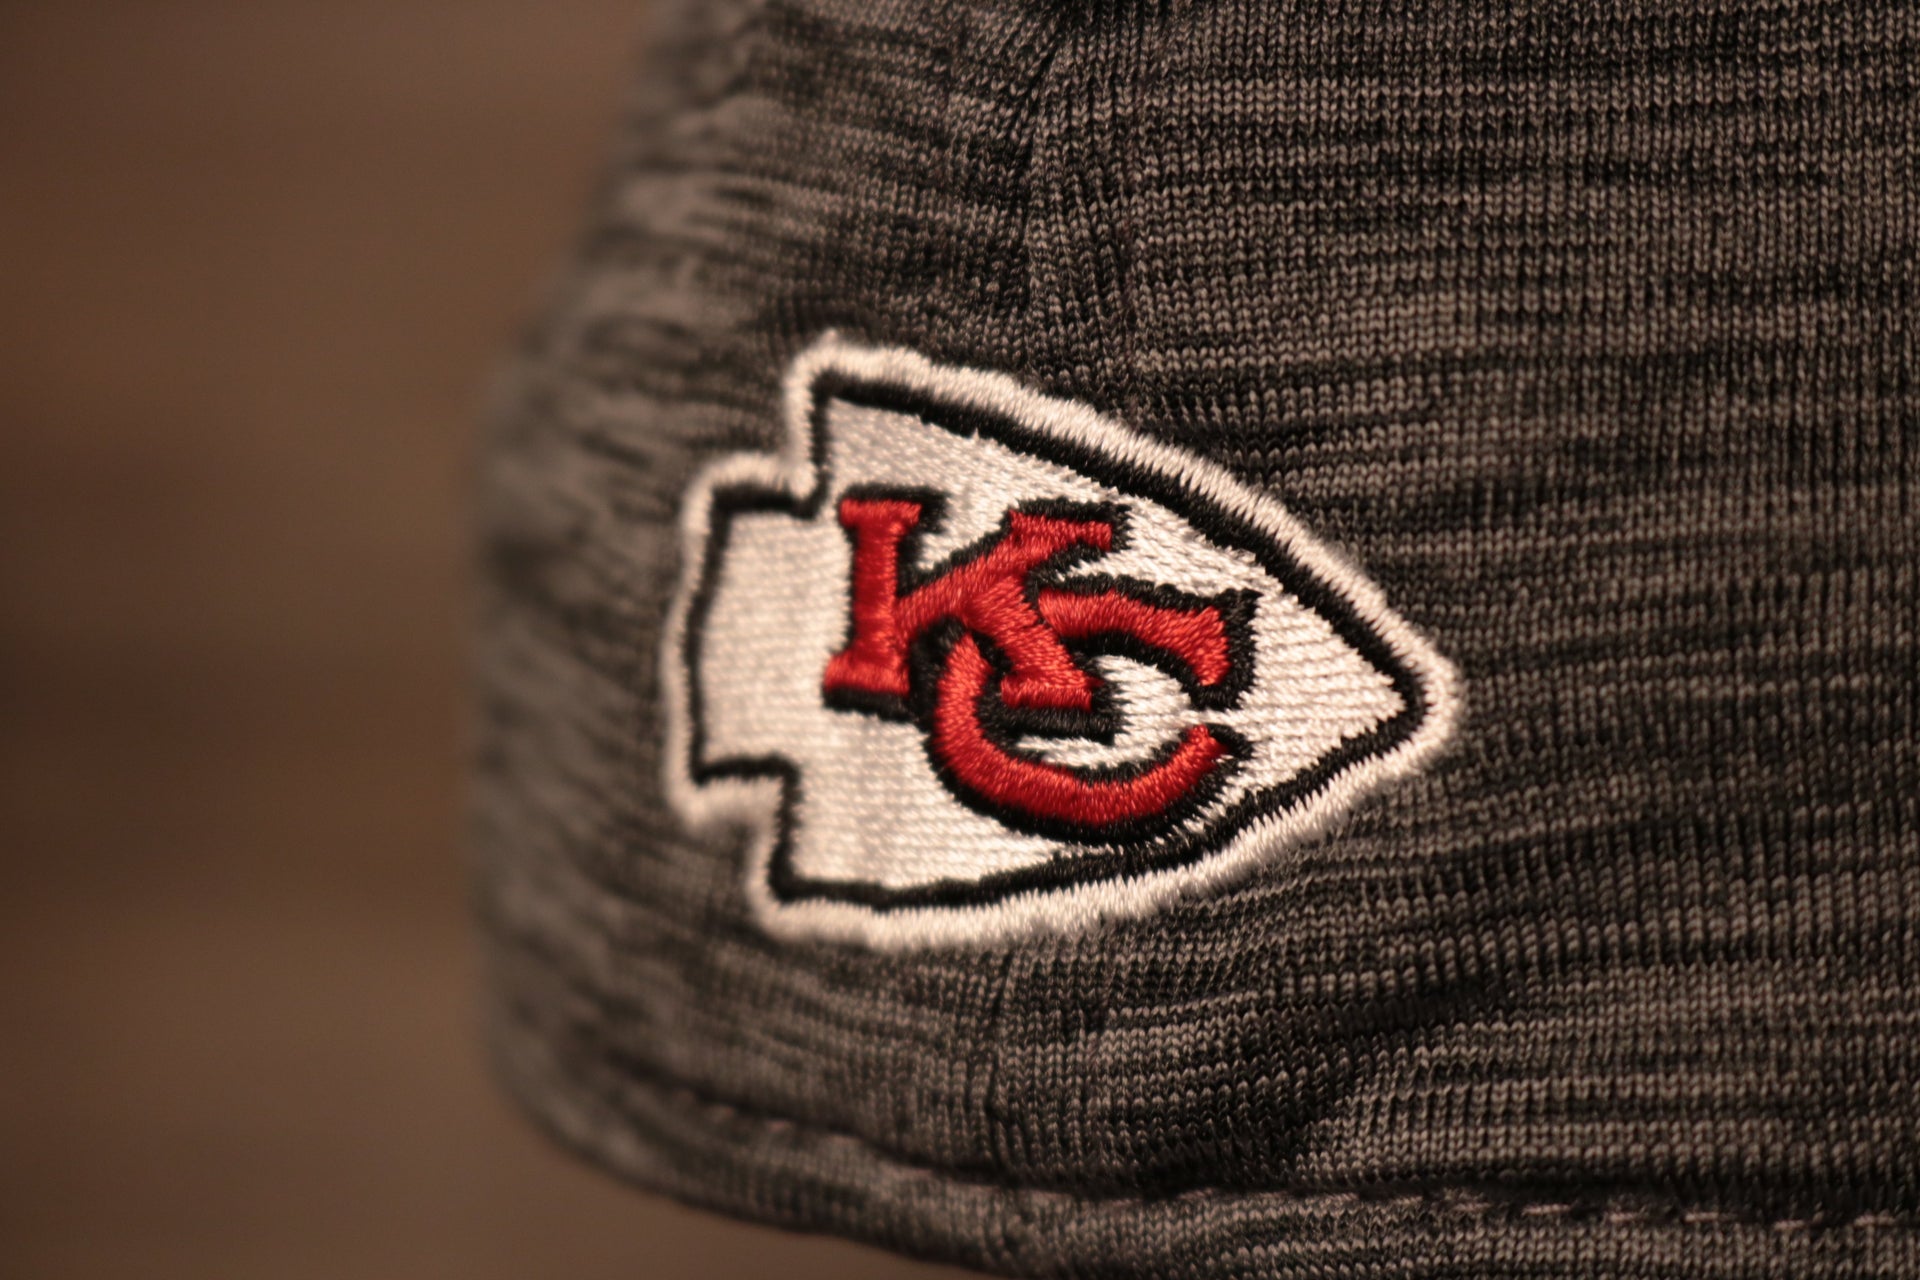 The chiefs logo is on the back Chiefs 2020 Training Camp Flexfit | Kansas City Chiefs 2020 On-Field Grey Training Camp Stretch Fit